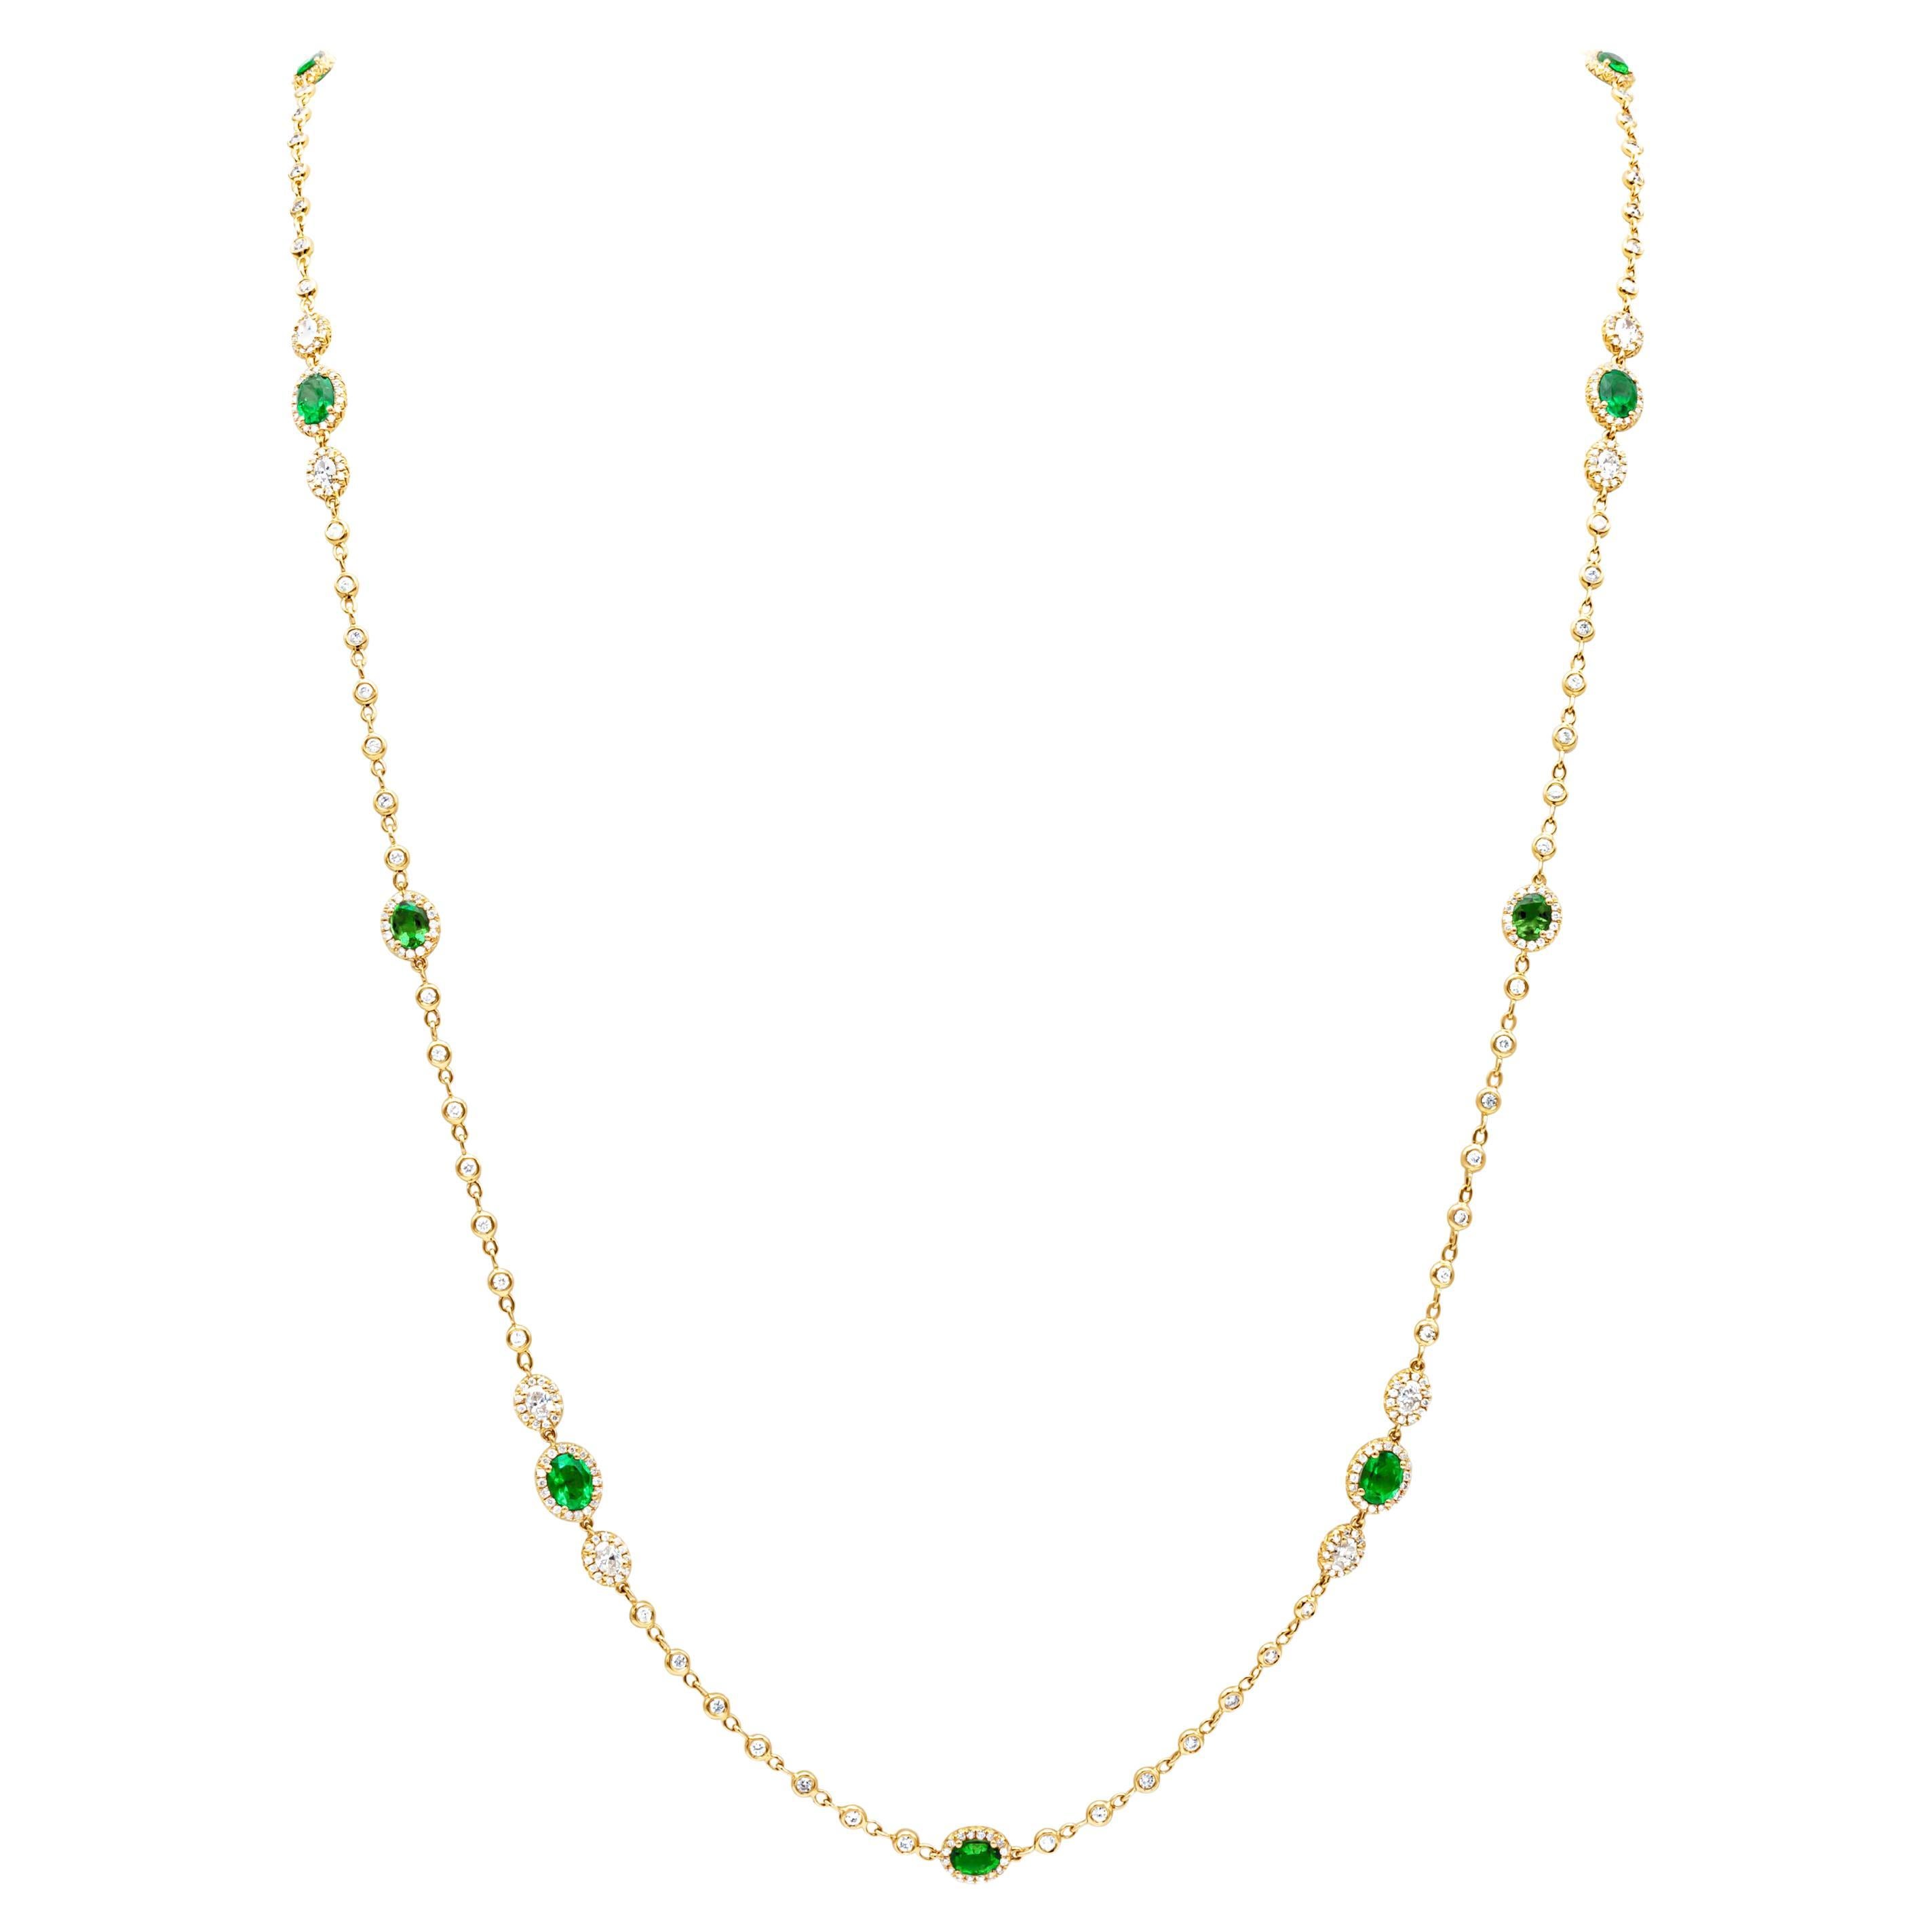 7.70 Carats Total Oval Cut Colombian Emerald & Diamond By the Yard Necklace For Sale